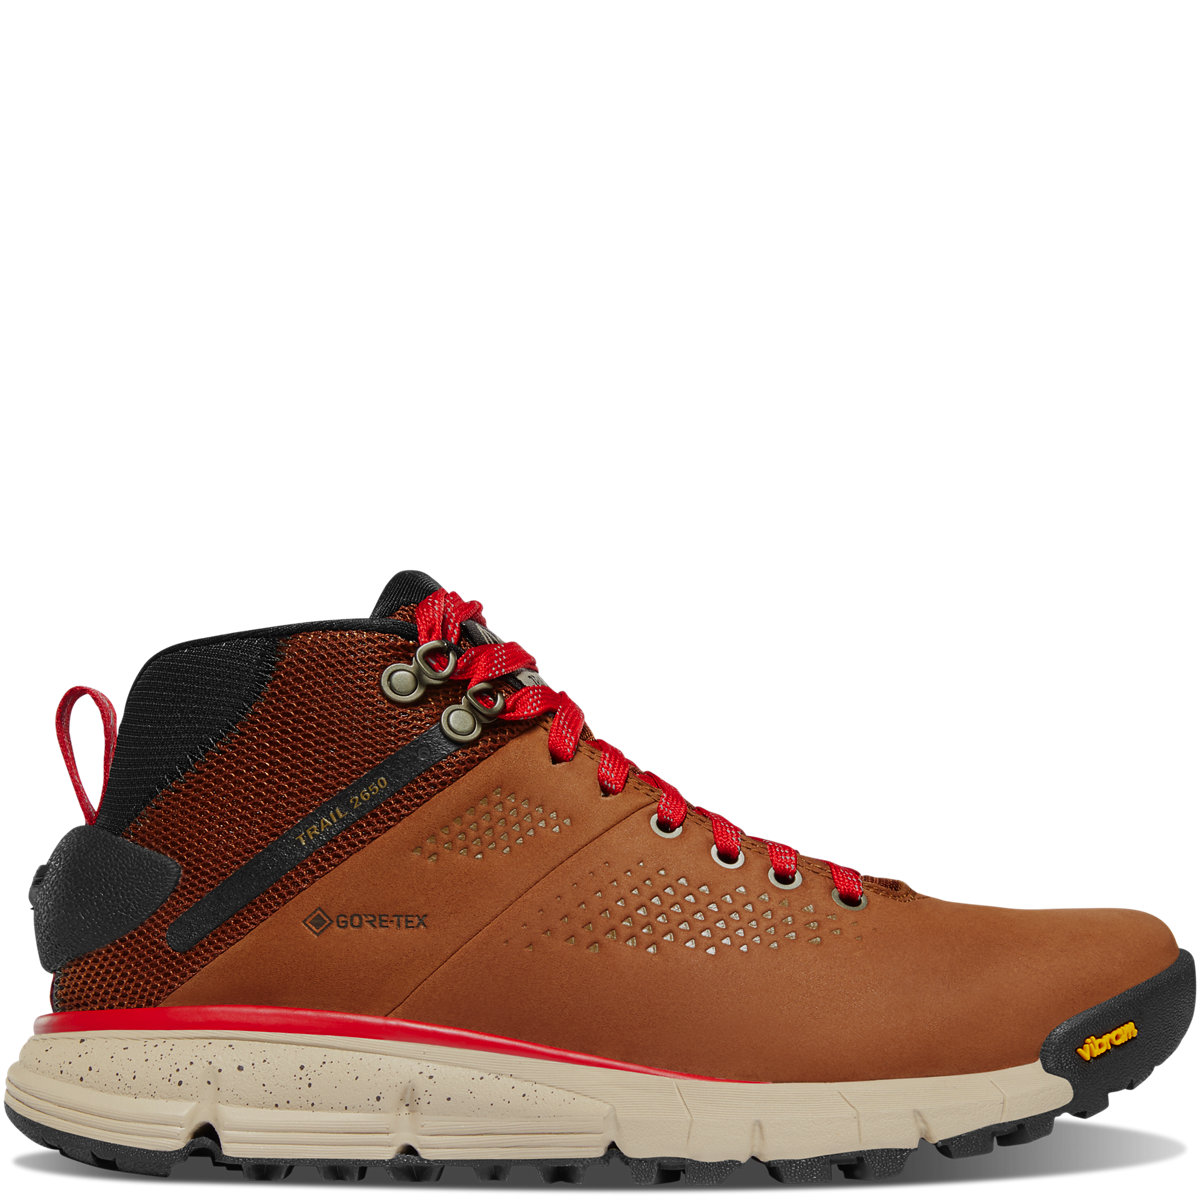 Danner - Trail 2650 Mid GTX Brown/Red